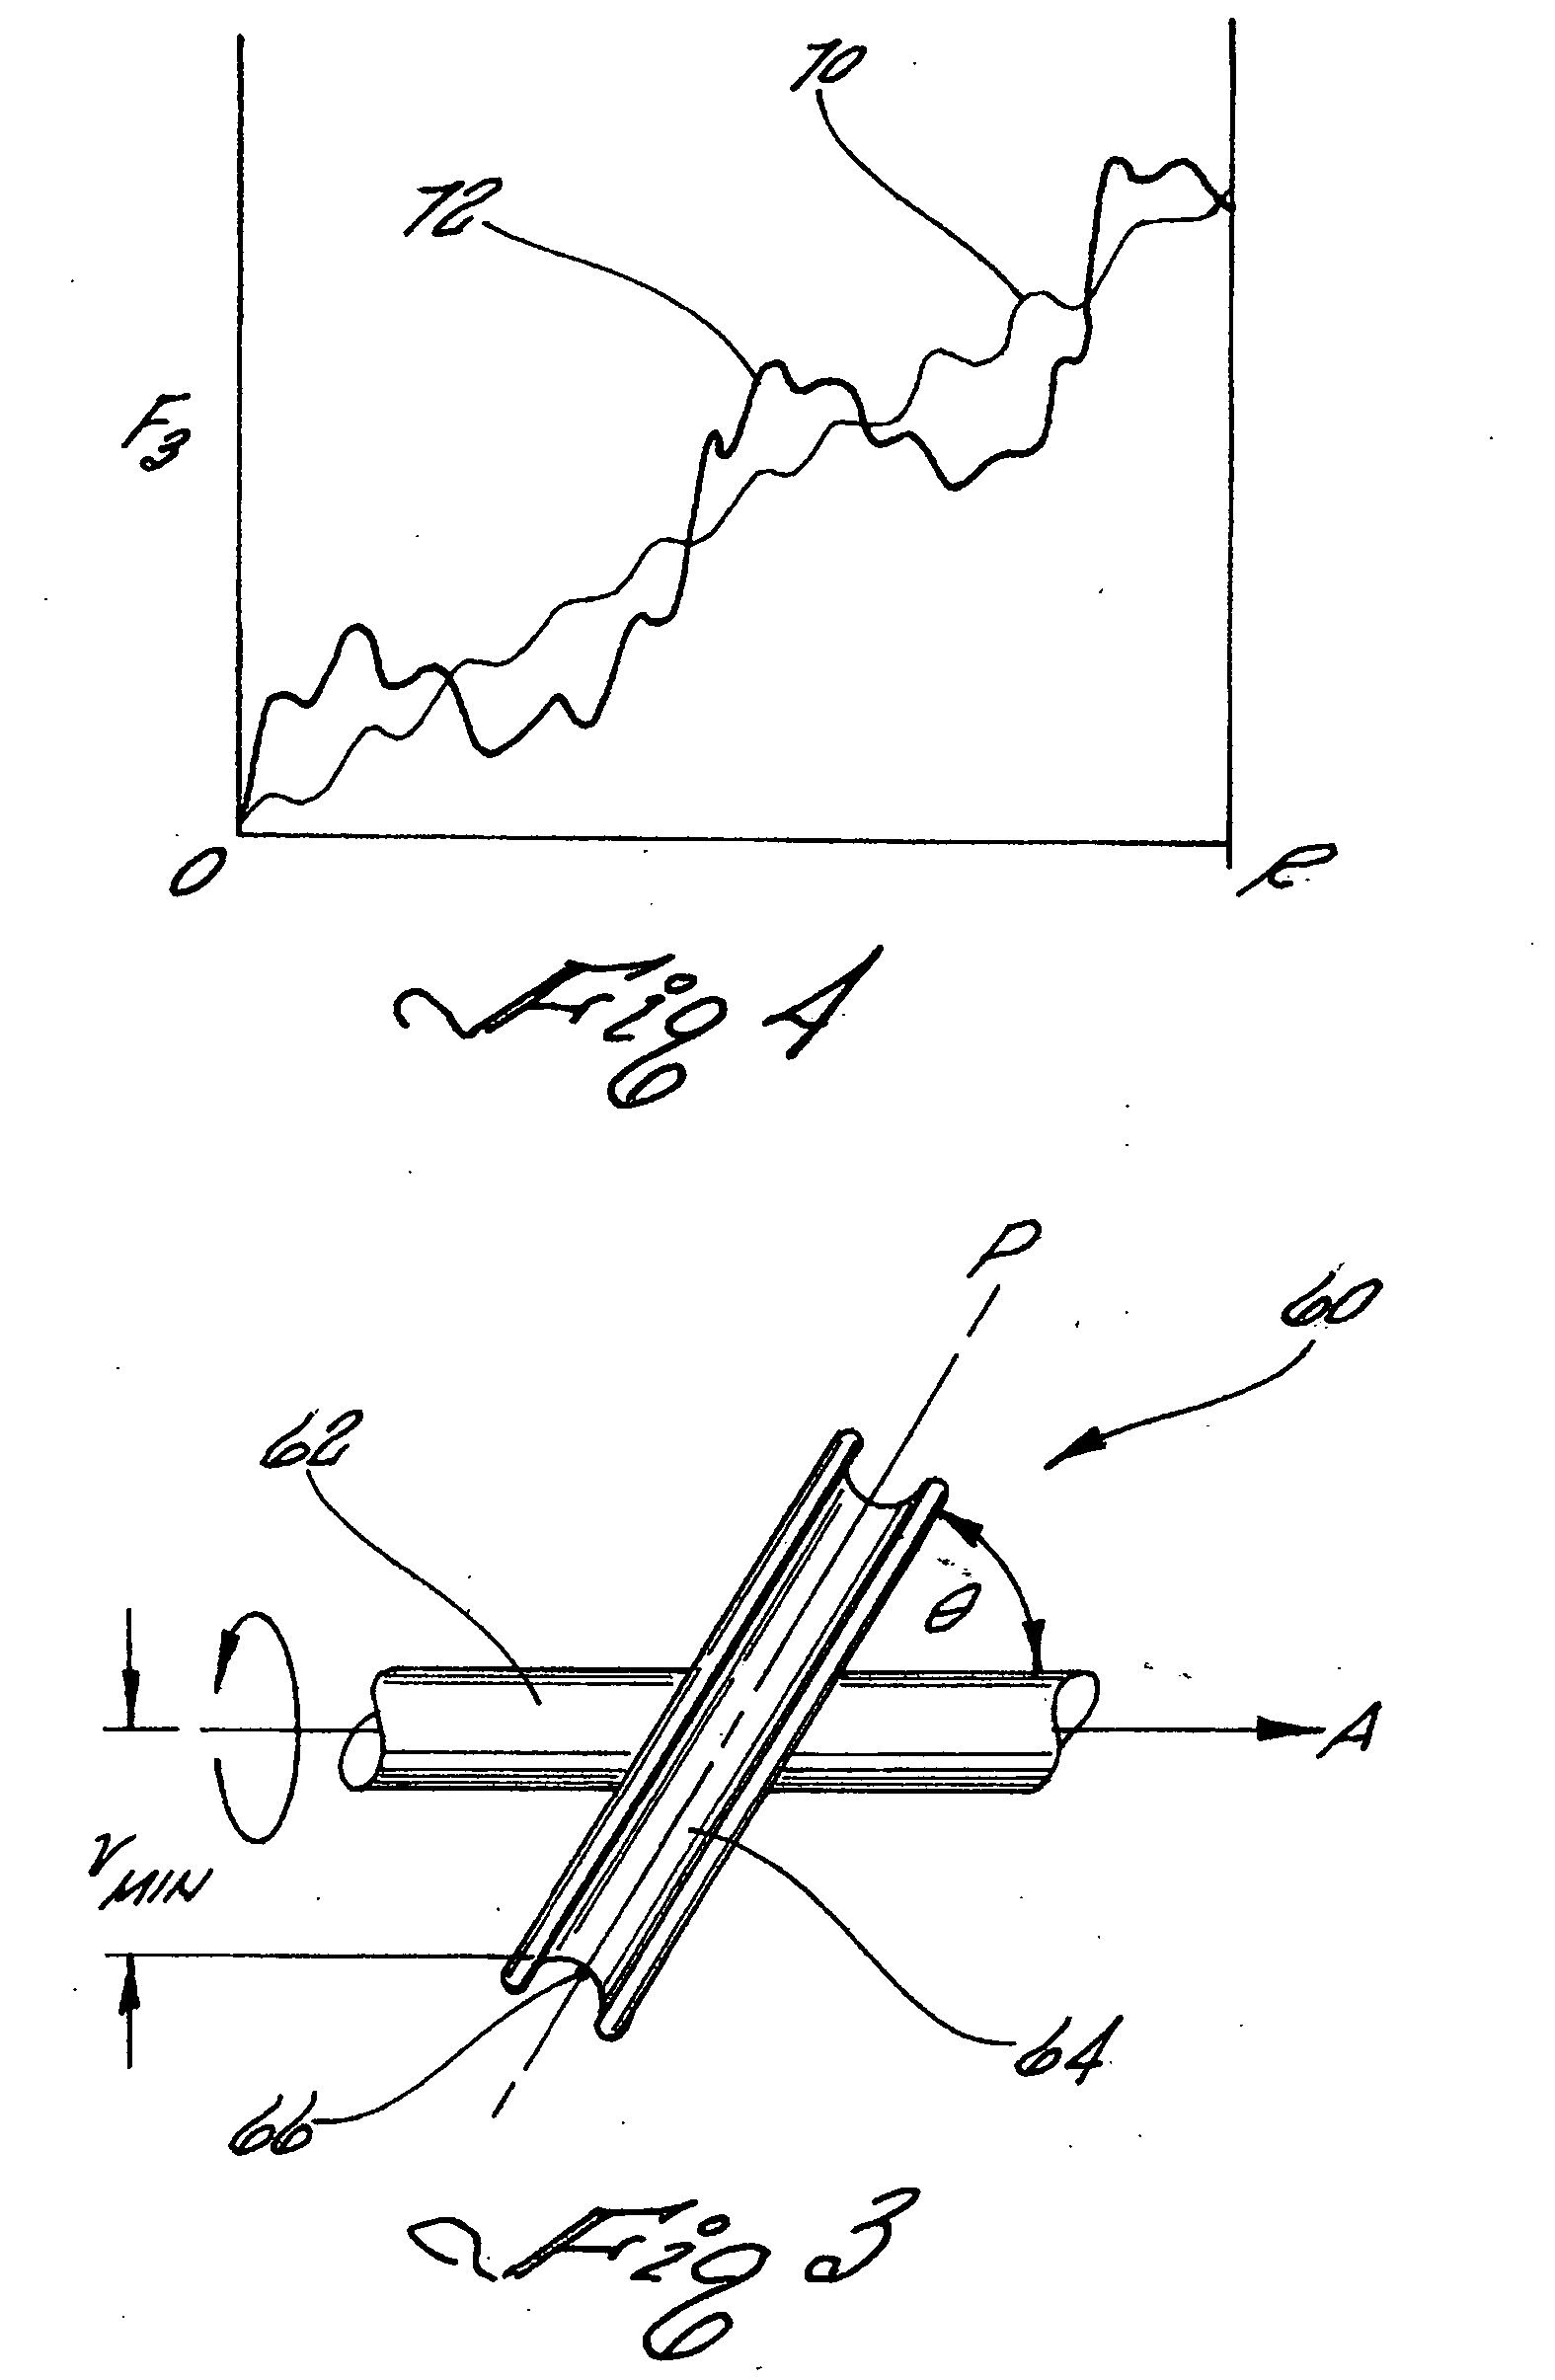 Oscillatory resistance exercise device and method